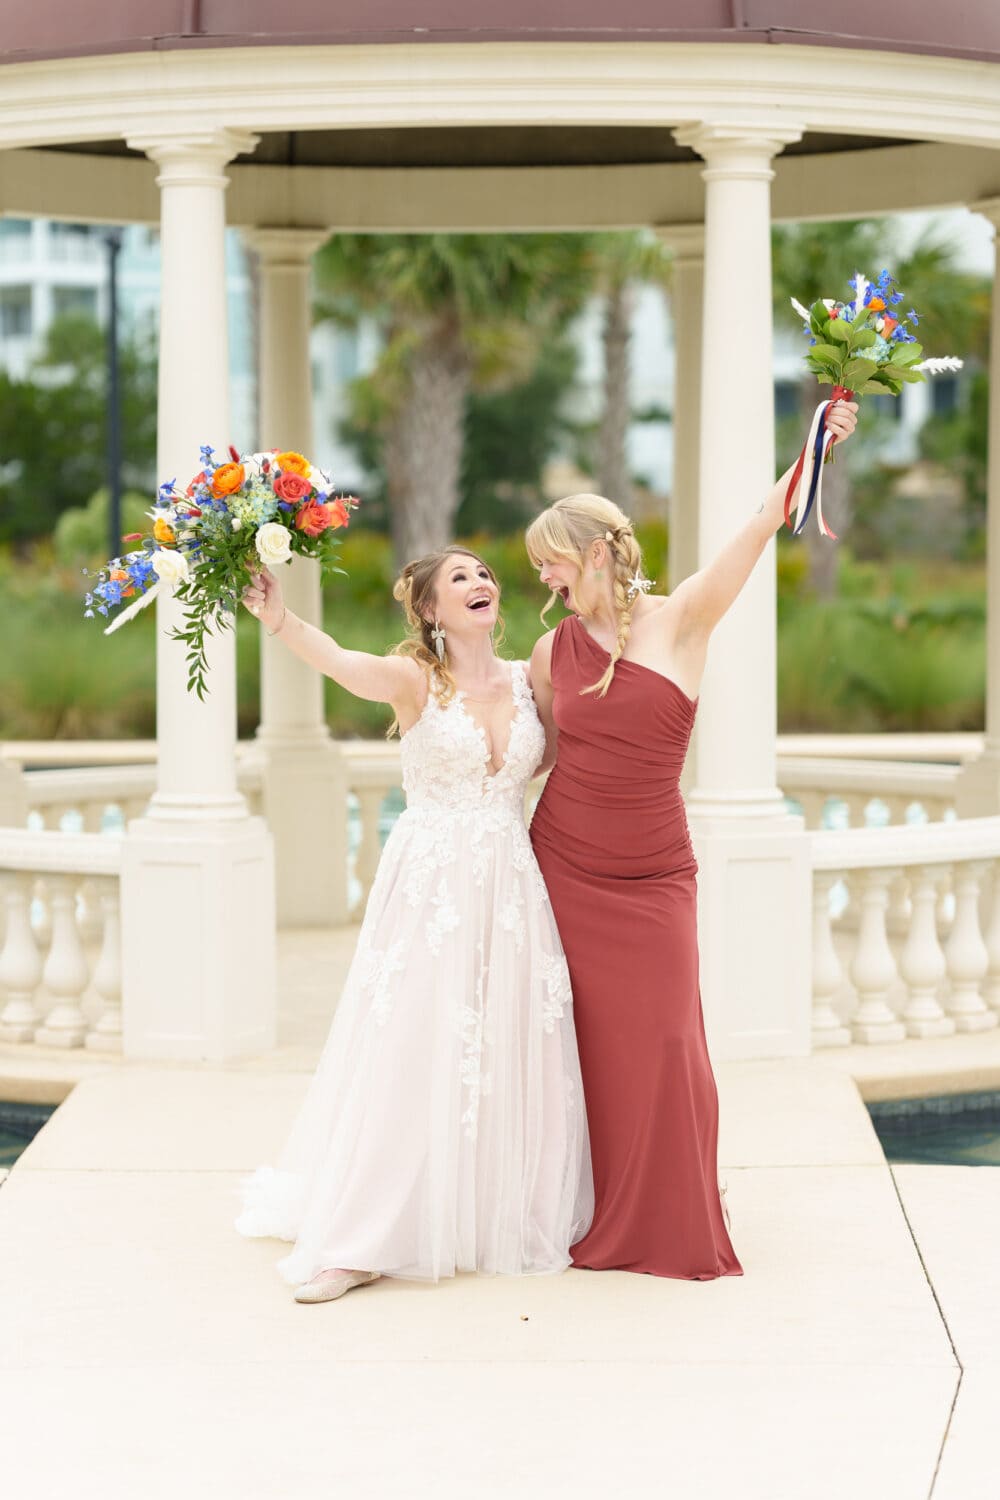 Individual portraits with bride and bridesmaids - 21 Main Events - North Myrtle Beach